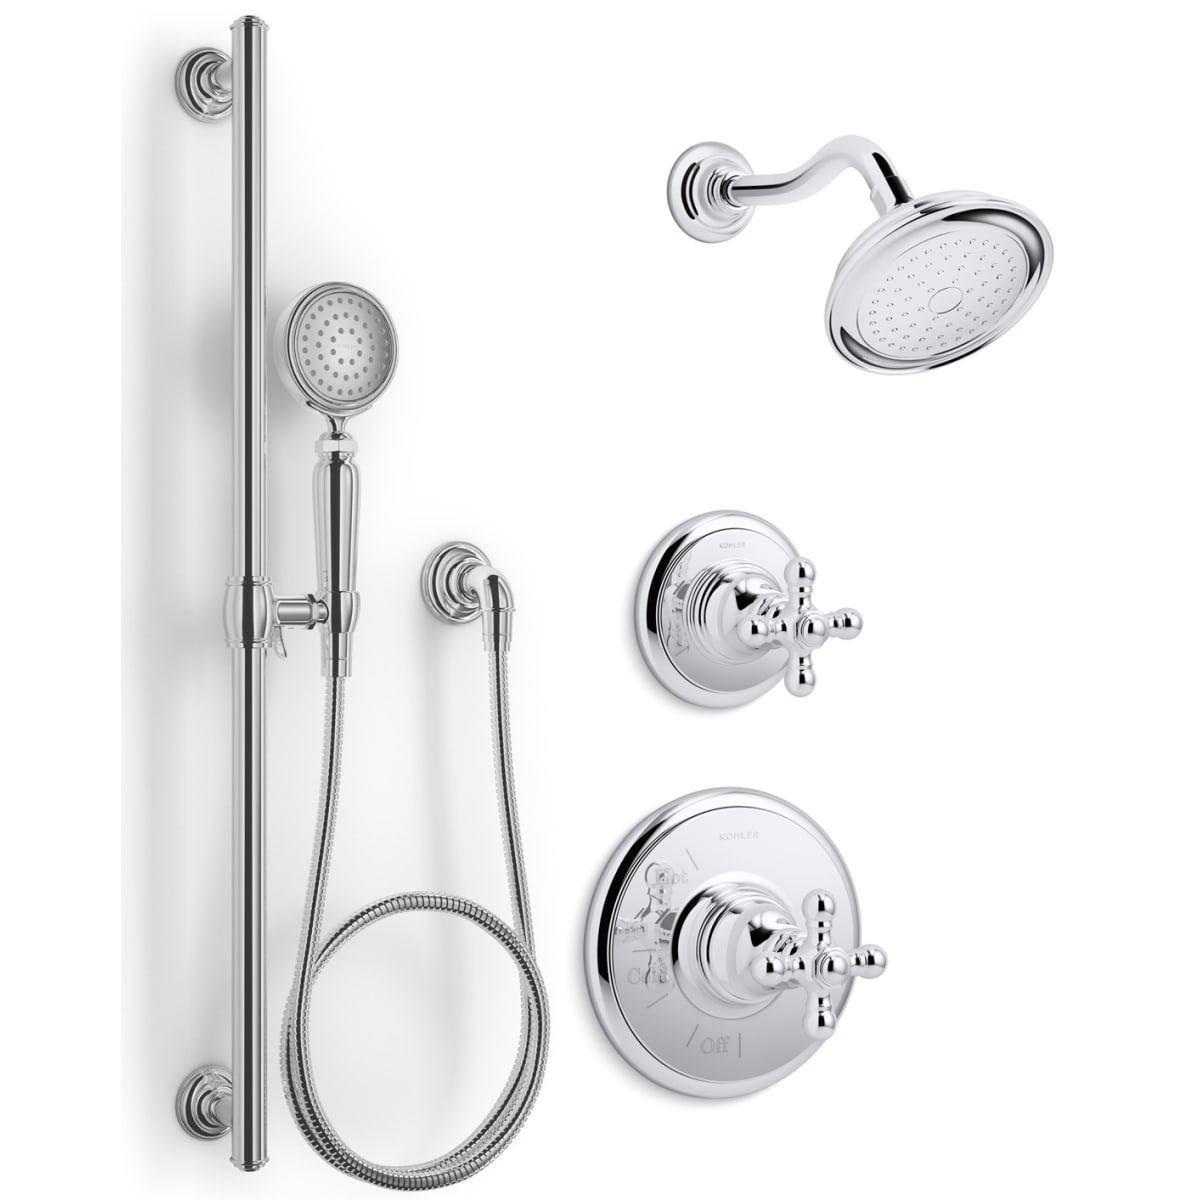 Kohler Mistos Single Handle 1 Spray Tub And Shower Faucet In Brushed Nickel Valve Included K R37028 4e Bn The Home Depot